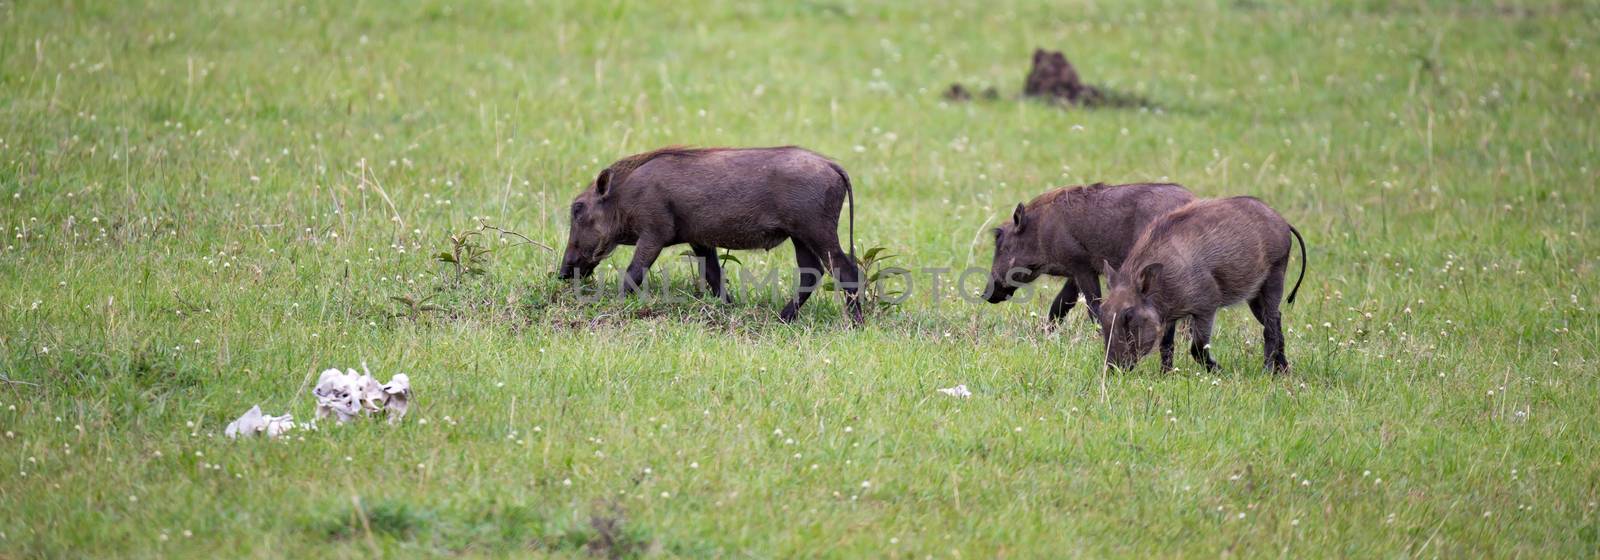 Some Warthogs are grazing in the savannah of Kenya